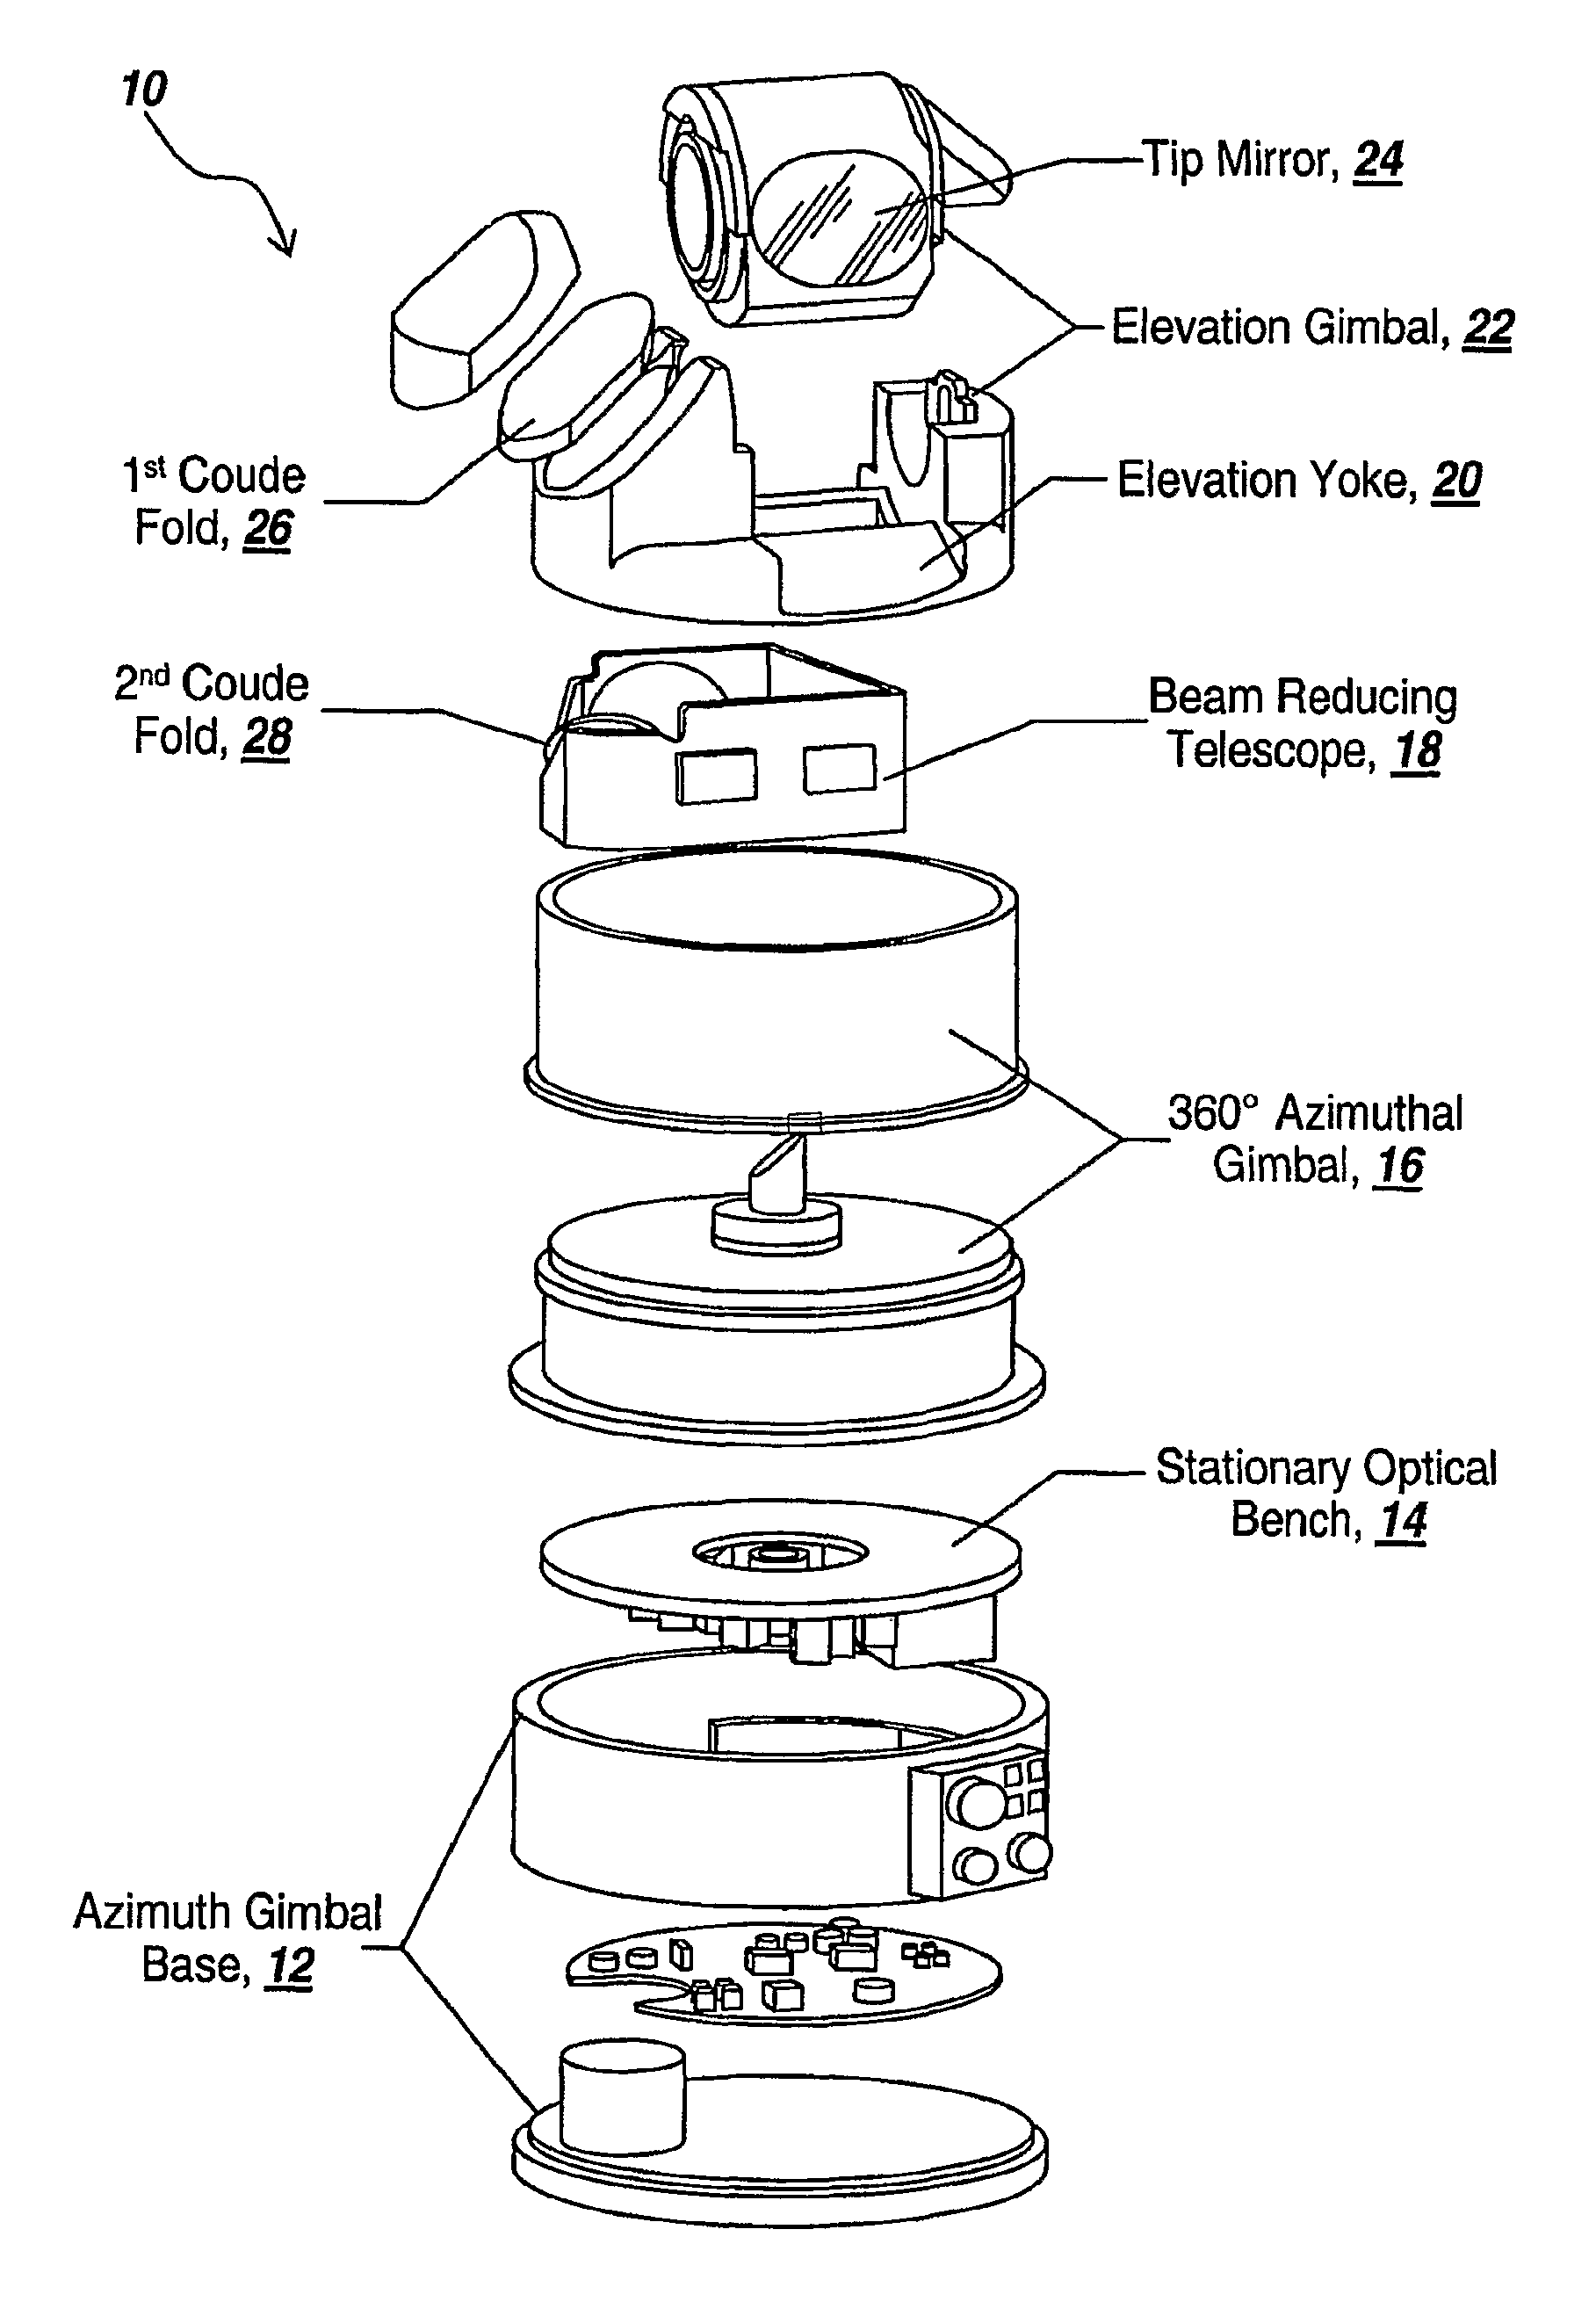 High accuracy optical pointing apparatus